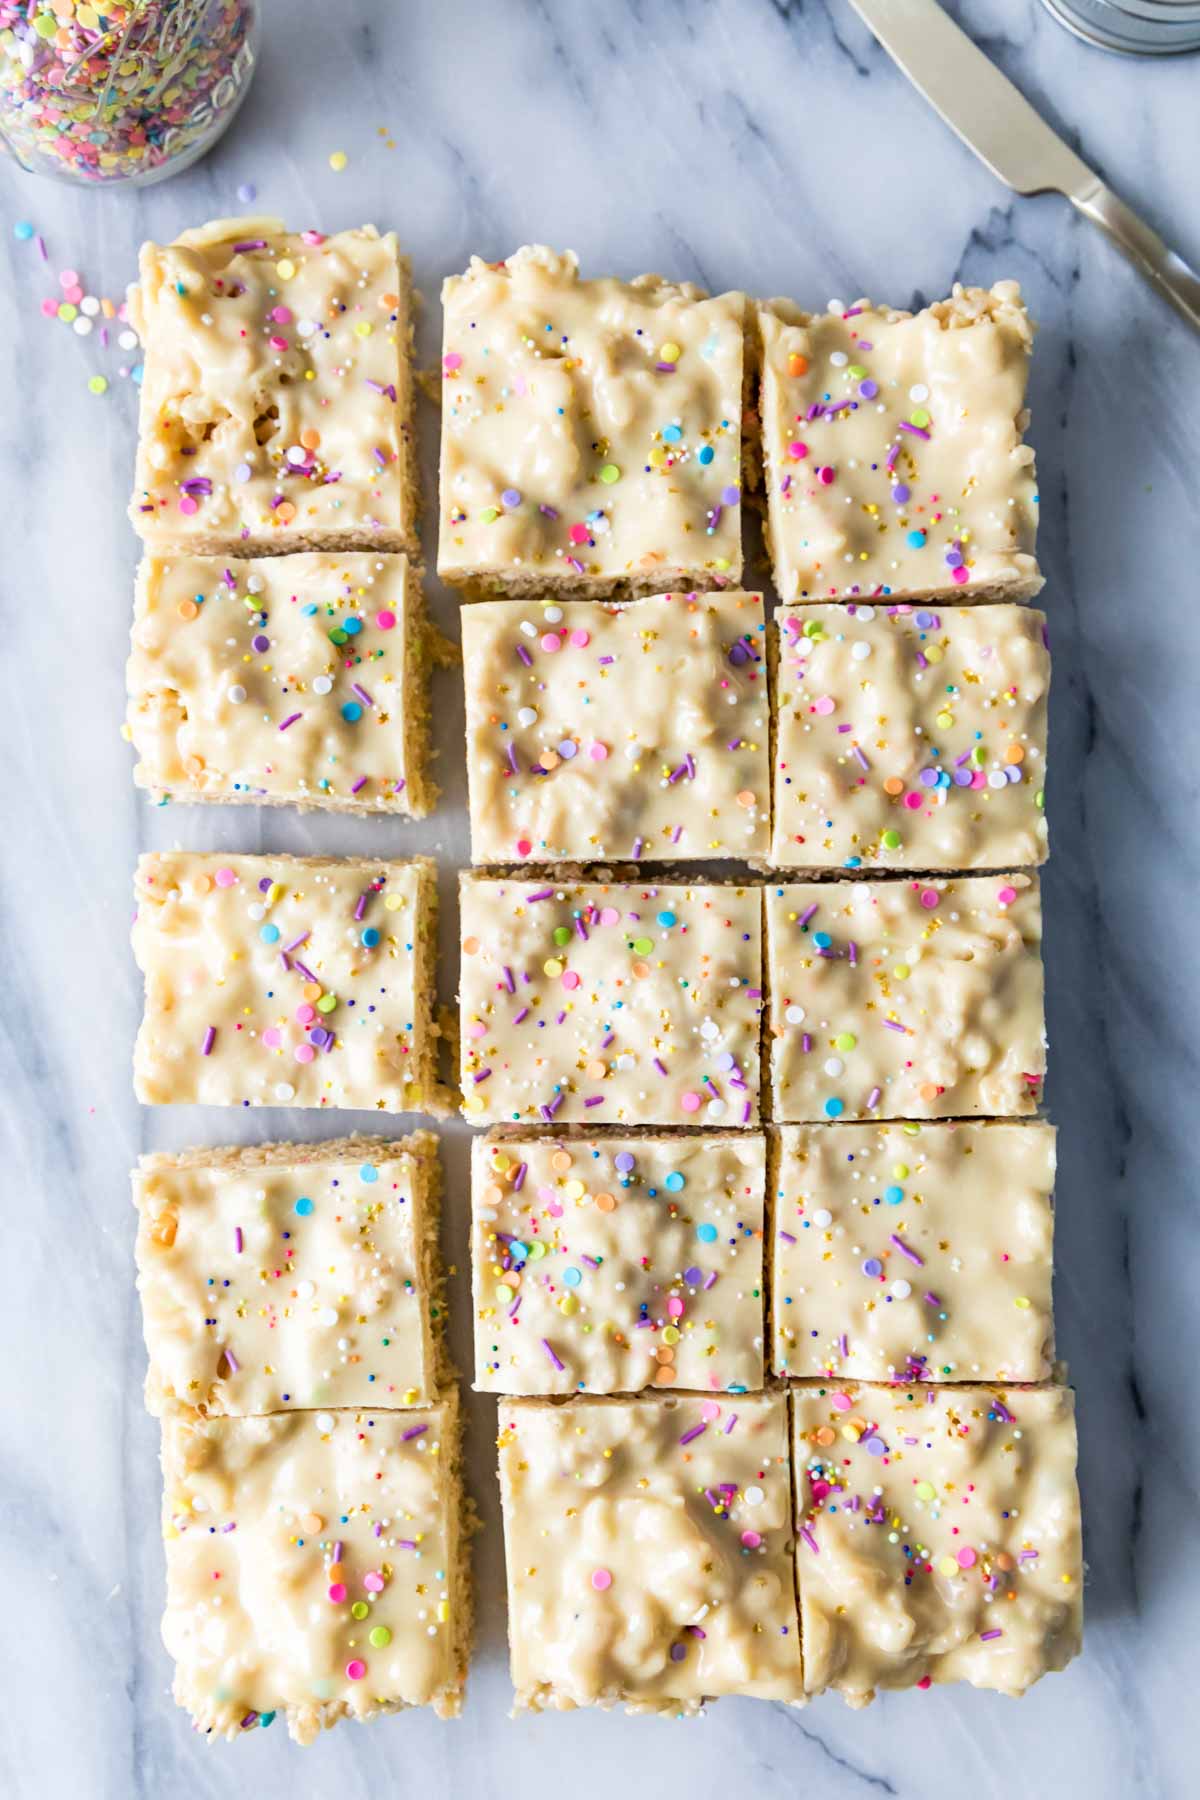 Overhead view of cake batter rice krispie treats after cutting into squares.